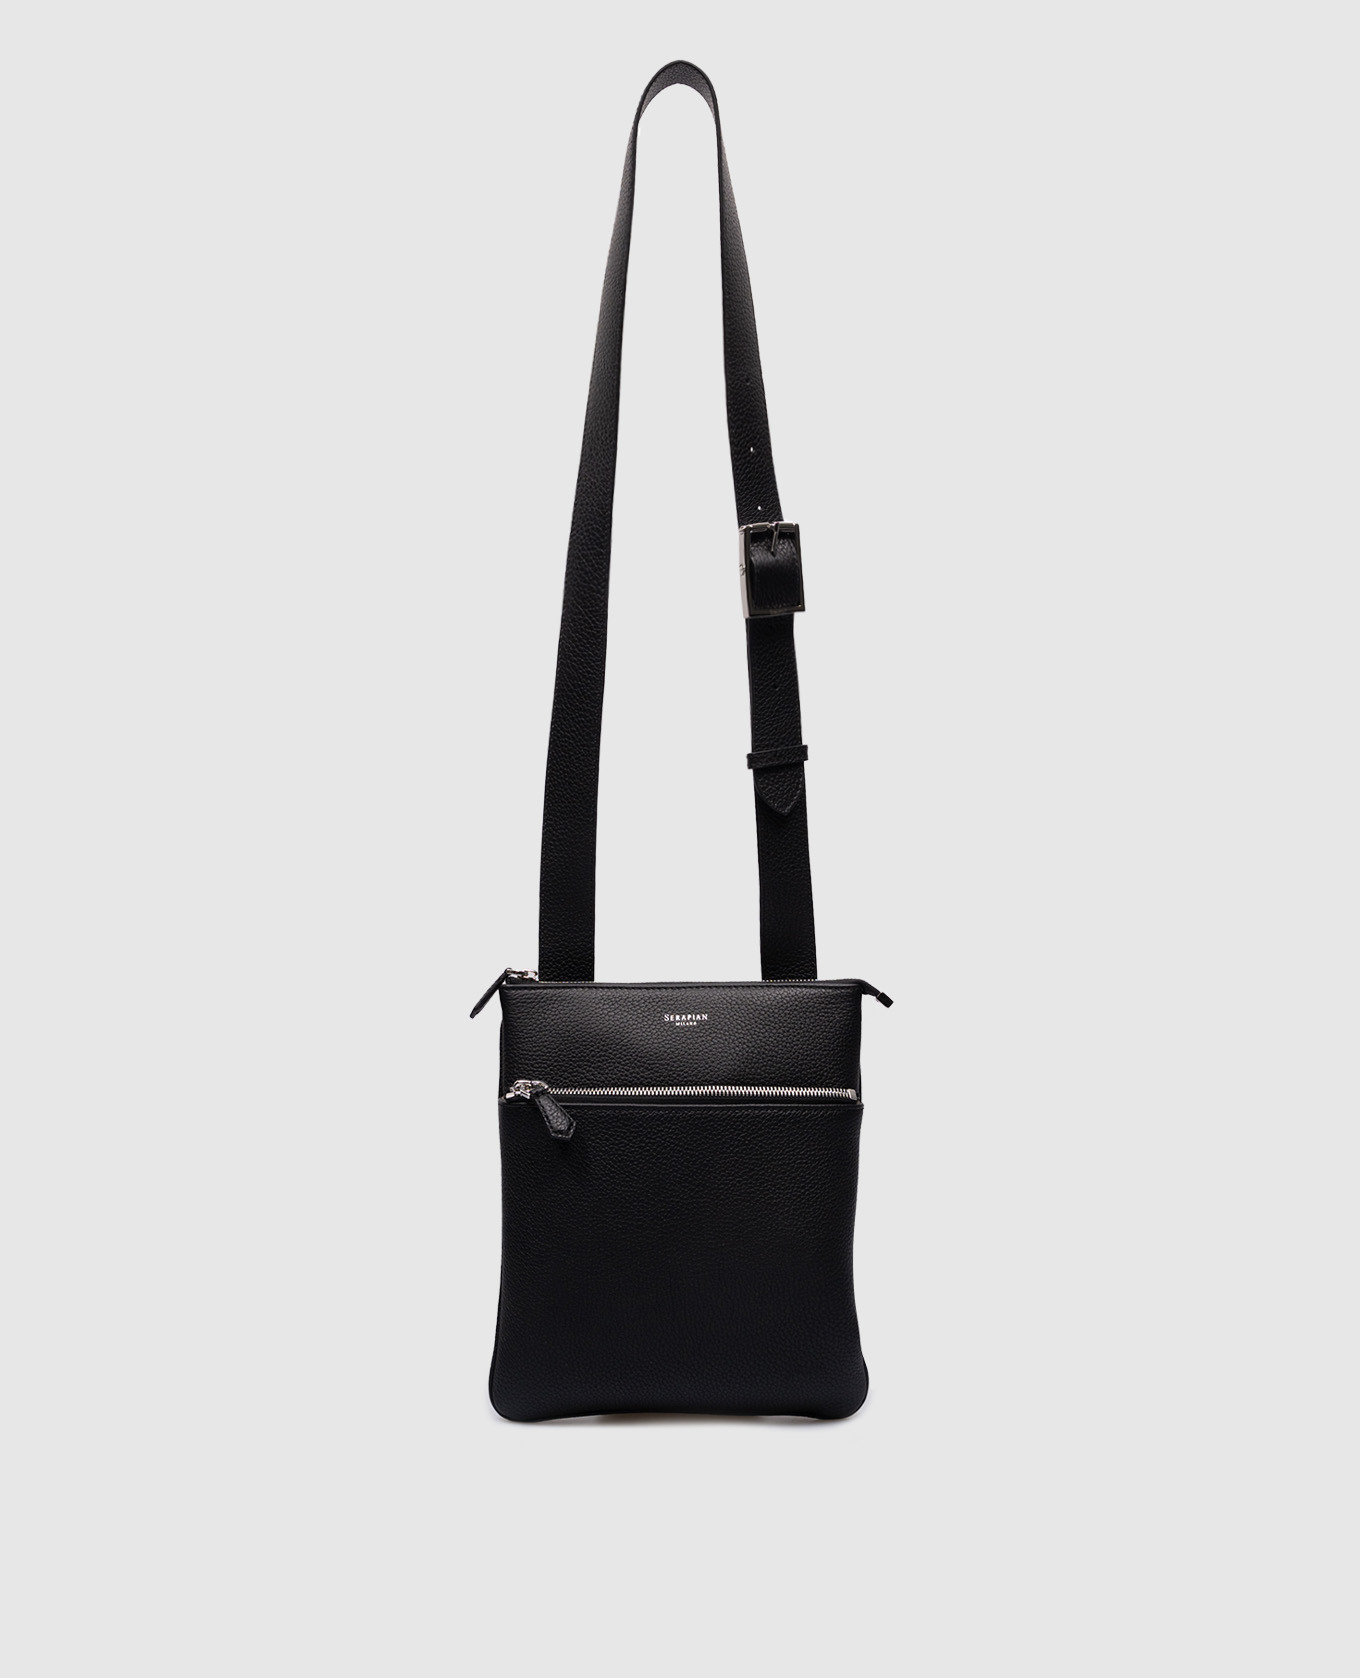 Black leather bag with logo